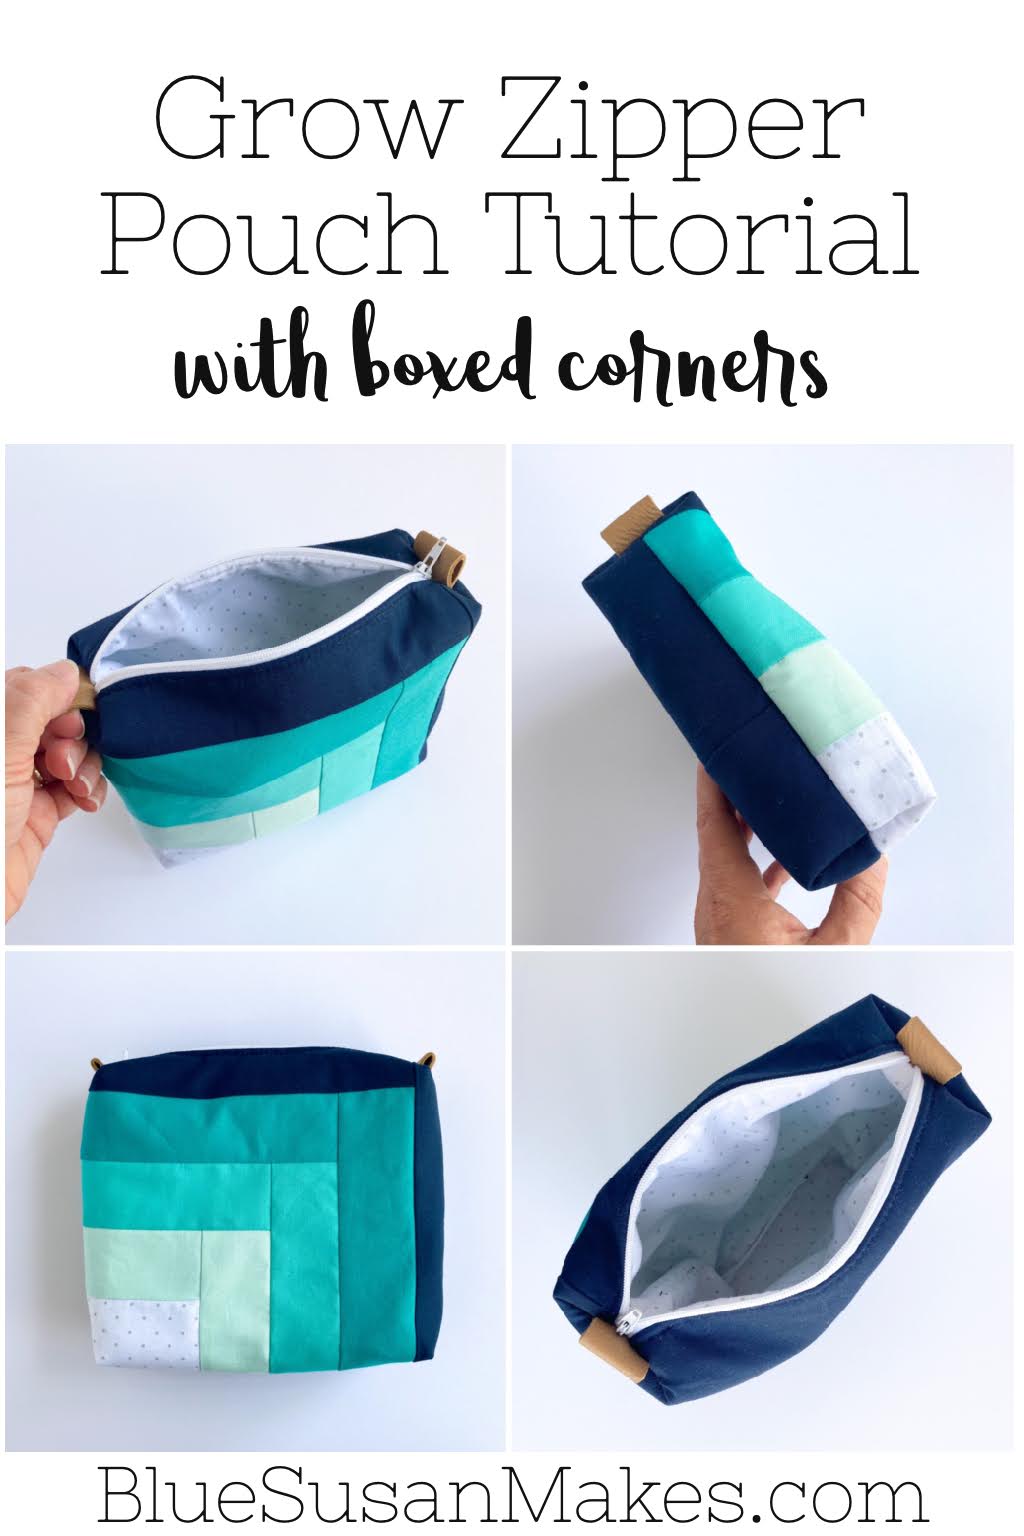 How To Make Cotton Zipper Pouches Online